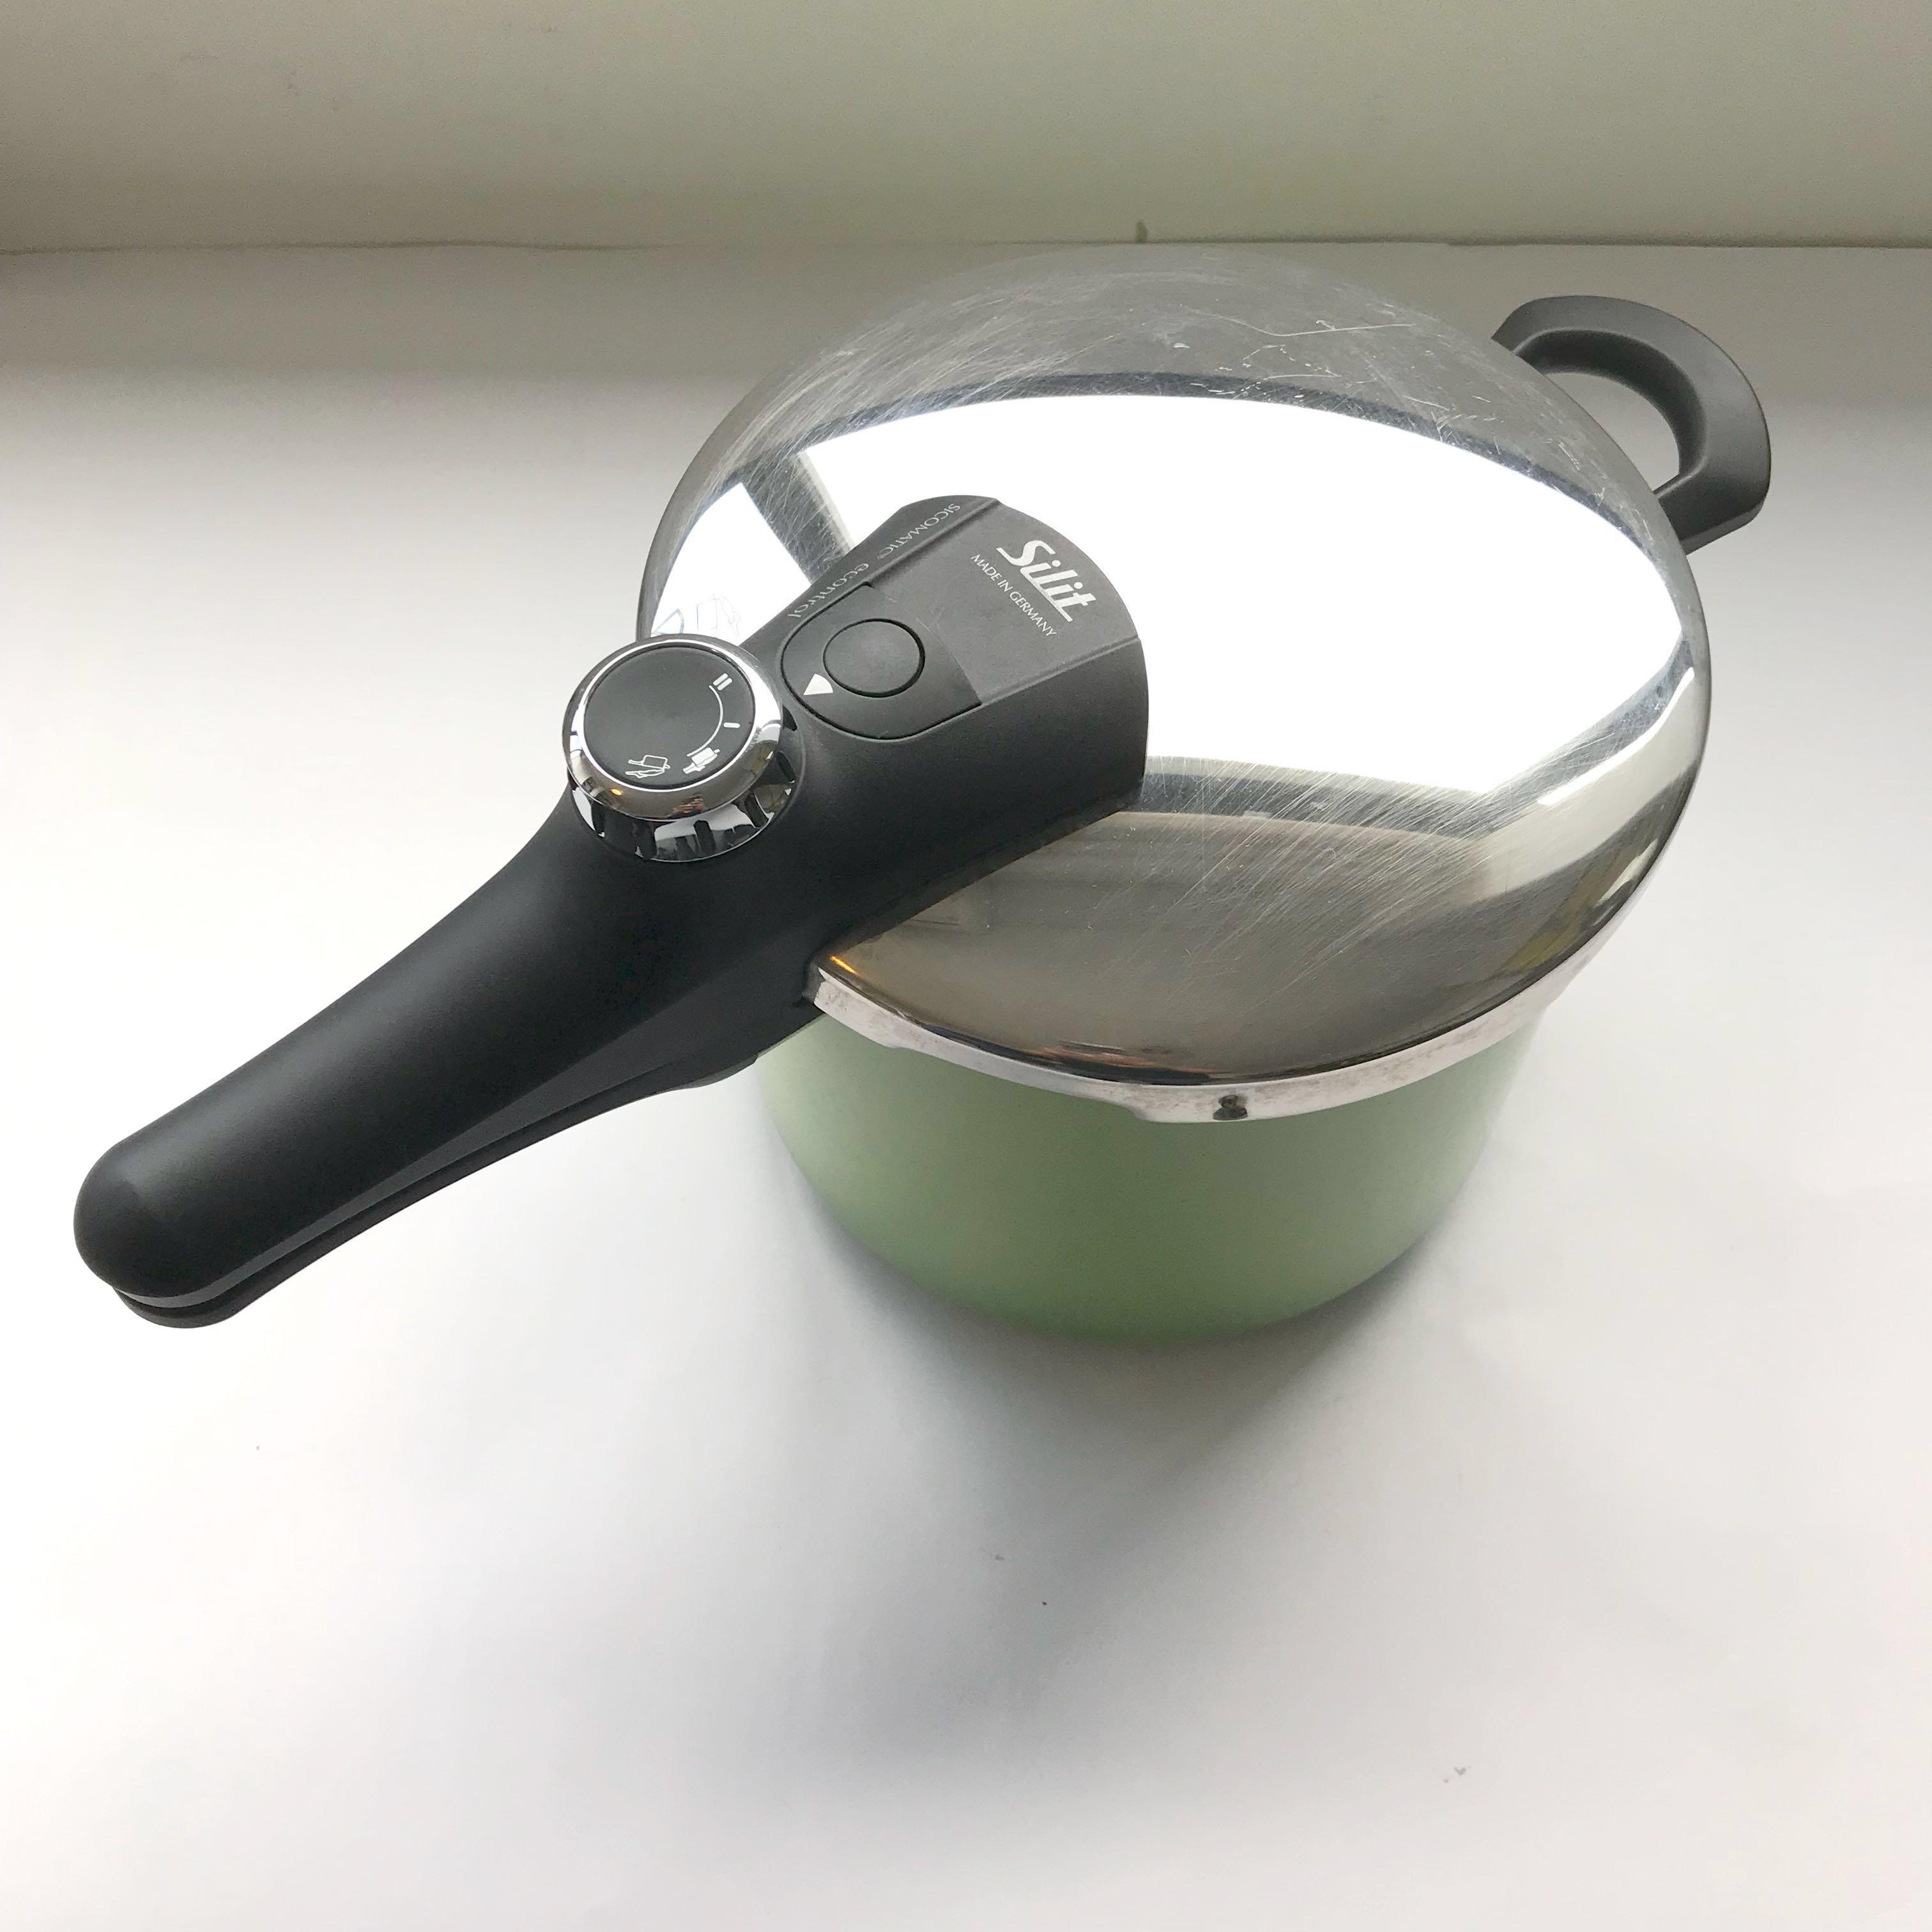 Silit Green Sicomatic T-Plus Pressure Cooker Pot 6.5L Made in Germany, TV &  Home Appliances, Kitchen Appliances, Cookers on Carousell